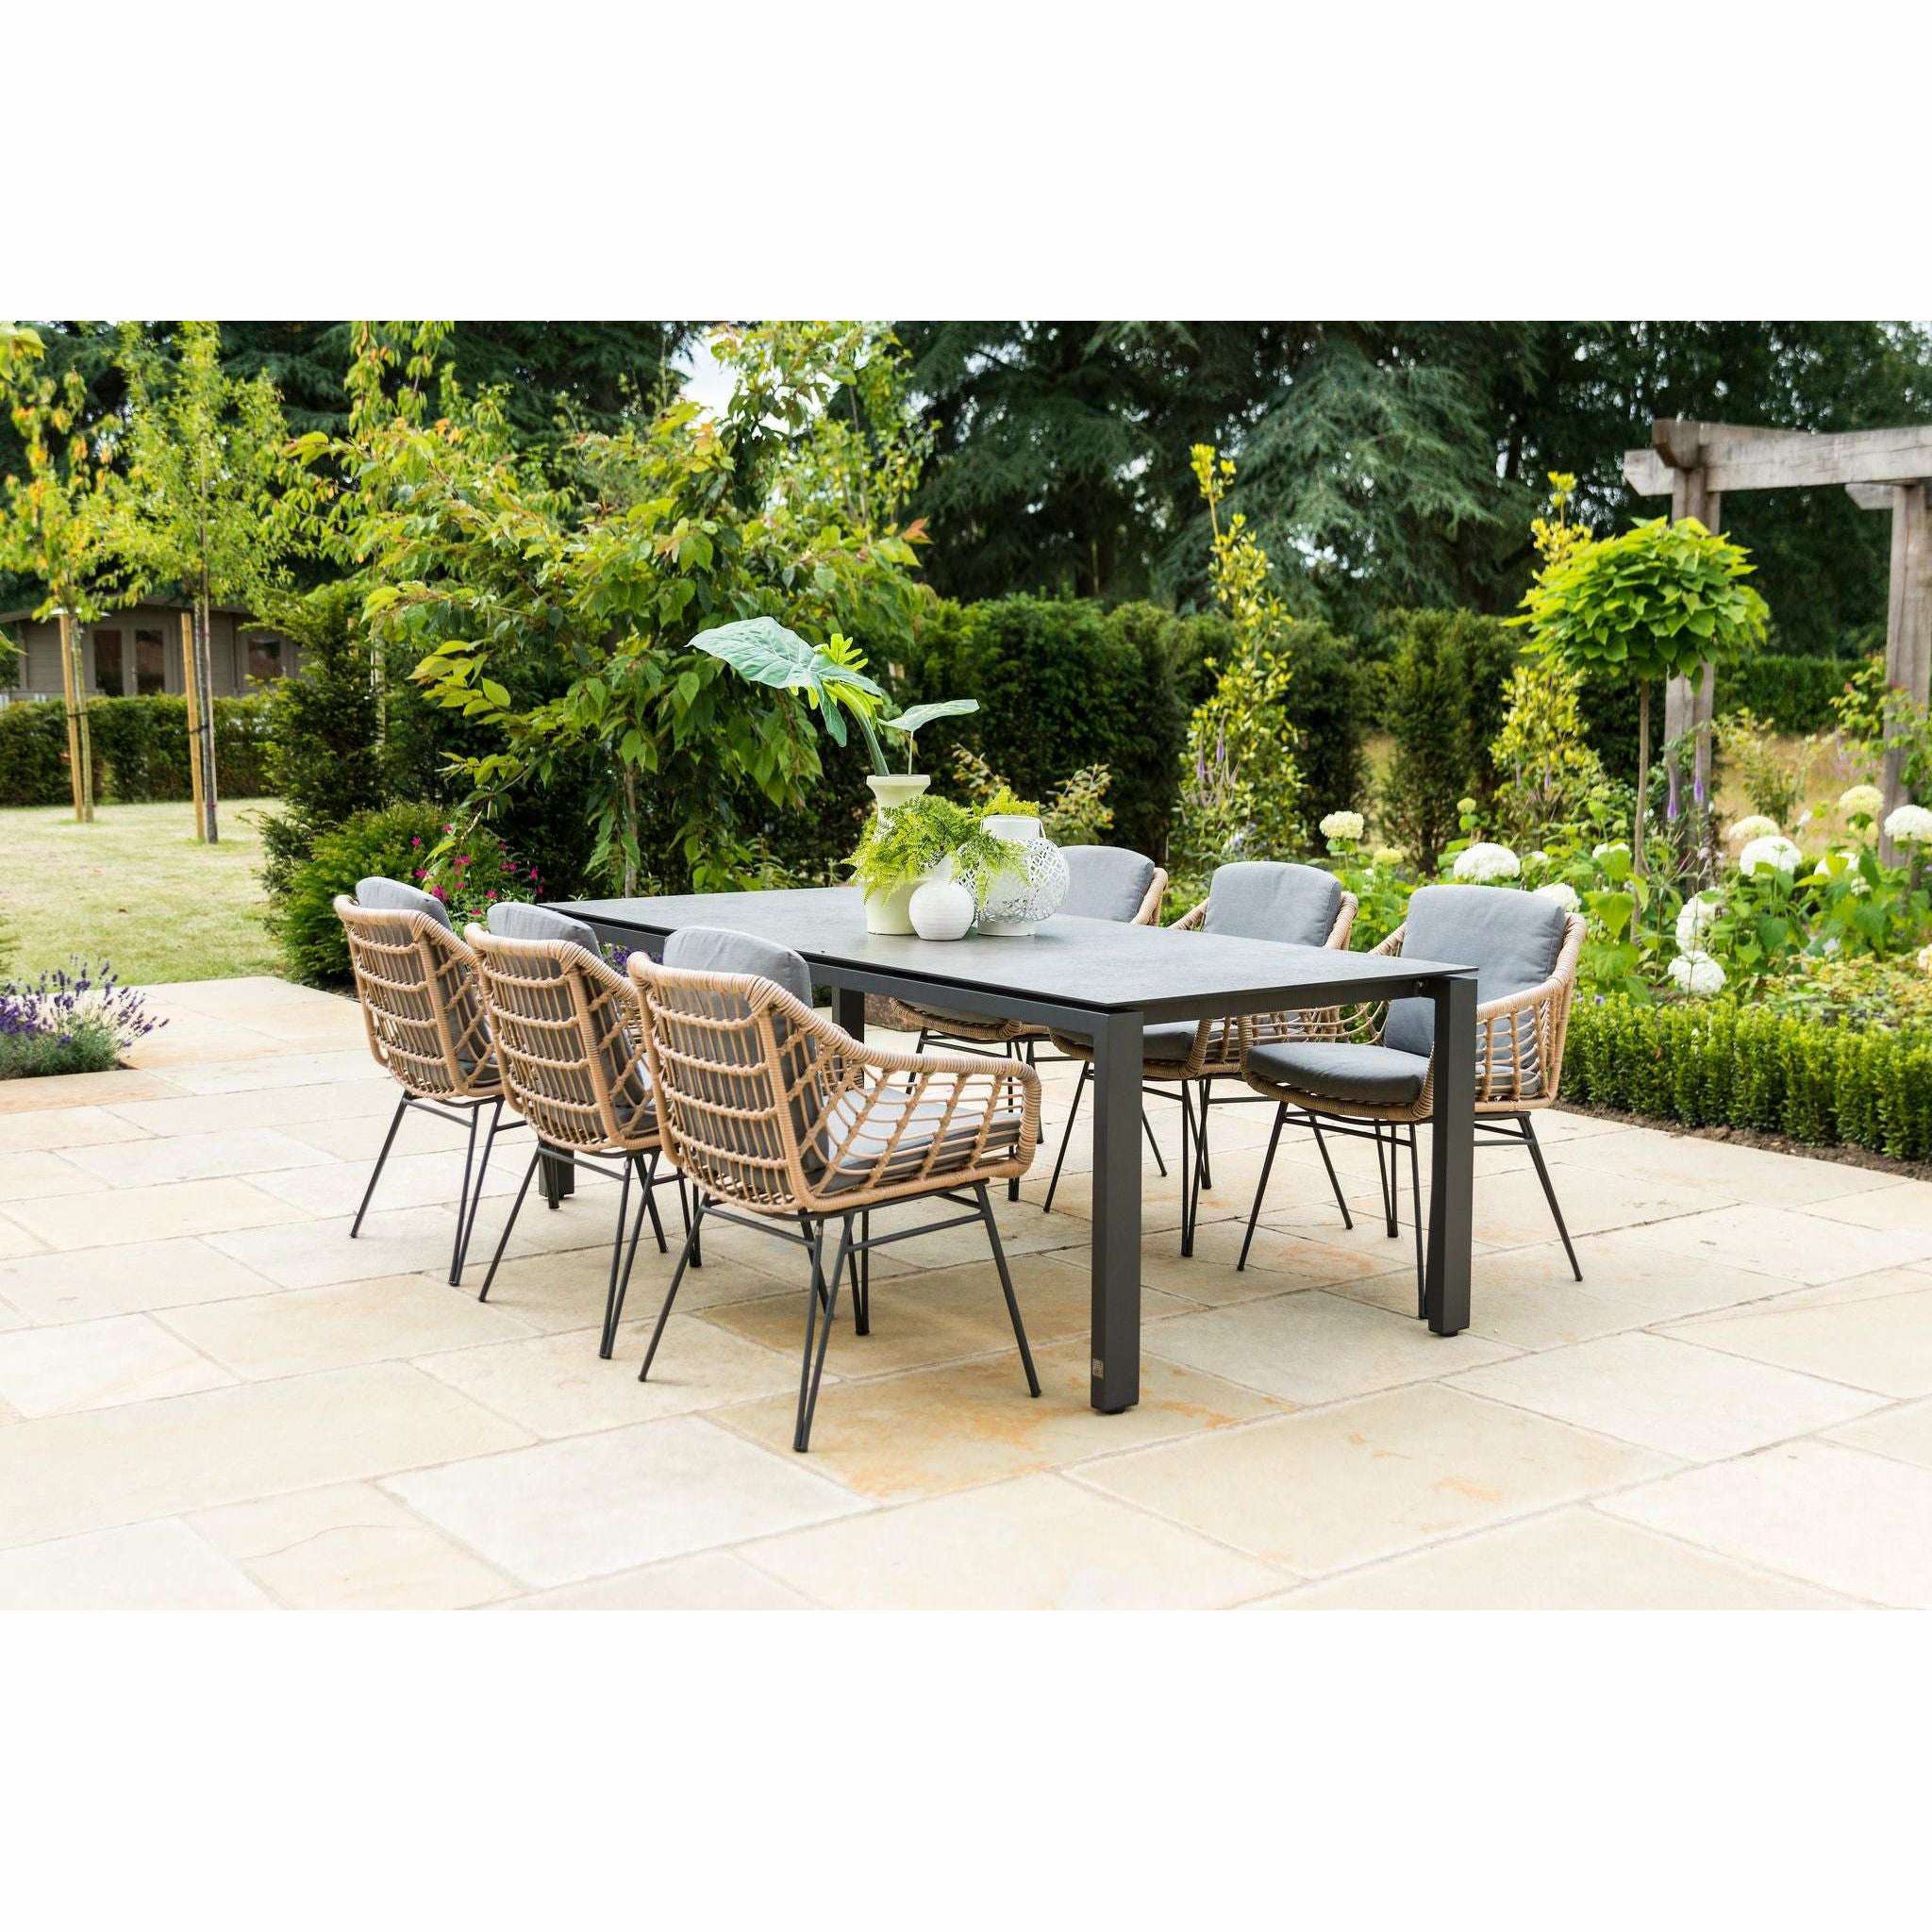 Exceptional Garden:4 Seasons Outdoor Cottage Hara 6 seater Dining set with 220cm Goa HPL Dining Table